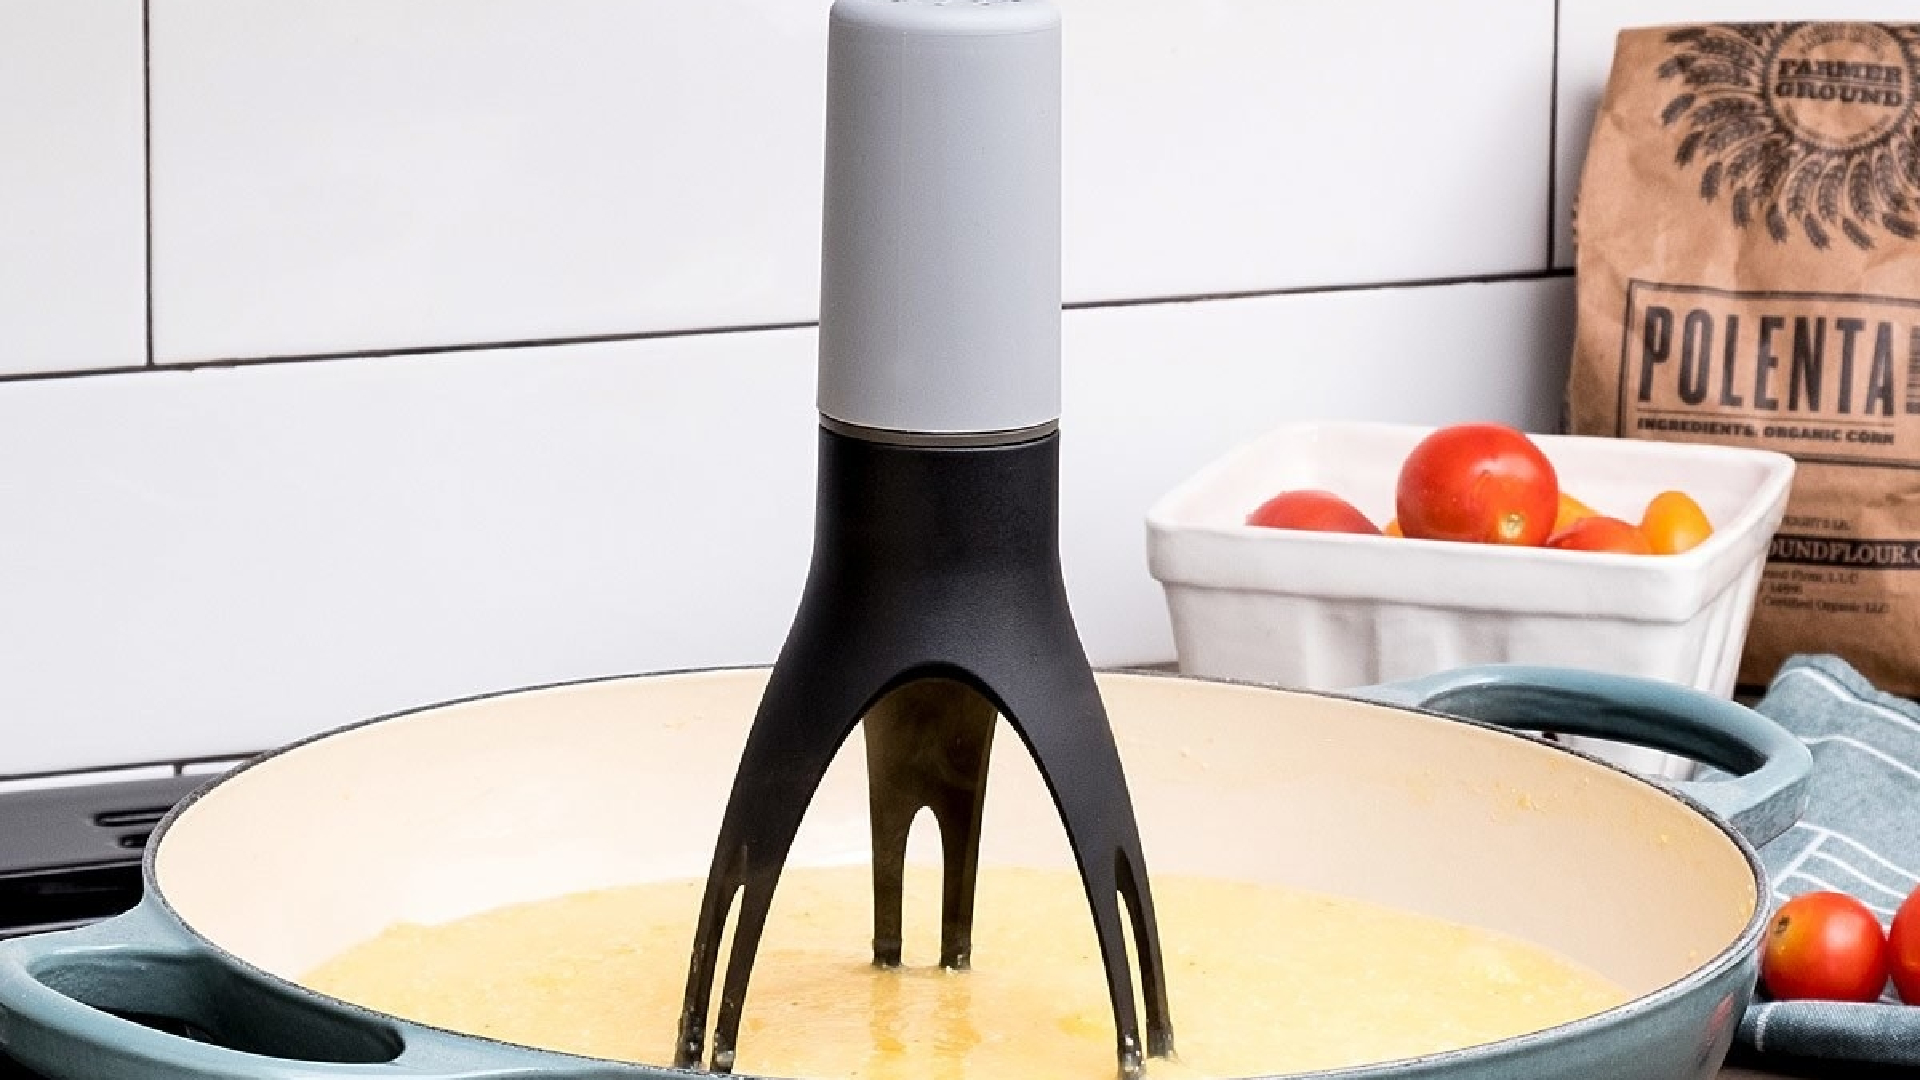 Anyone use an Automatic Pan Stirrer for making Roux? : r/Acadiana